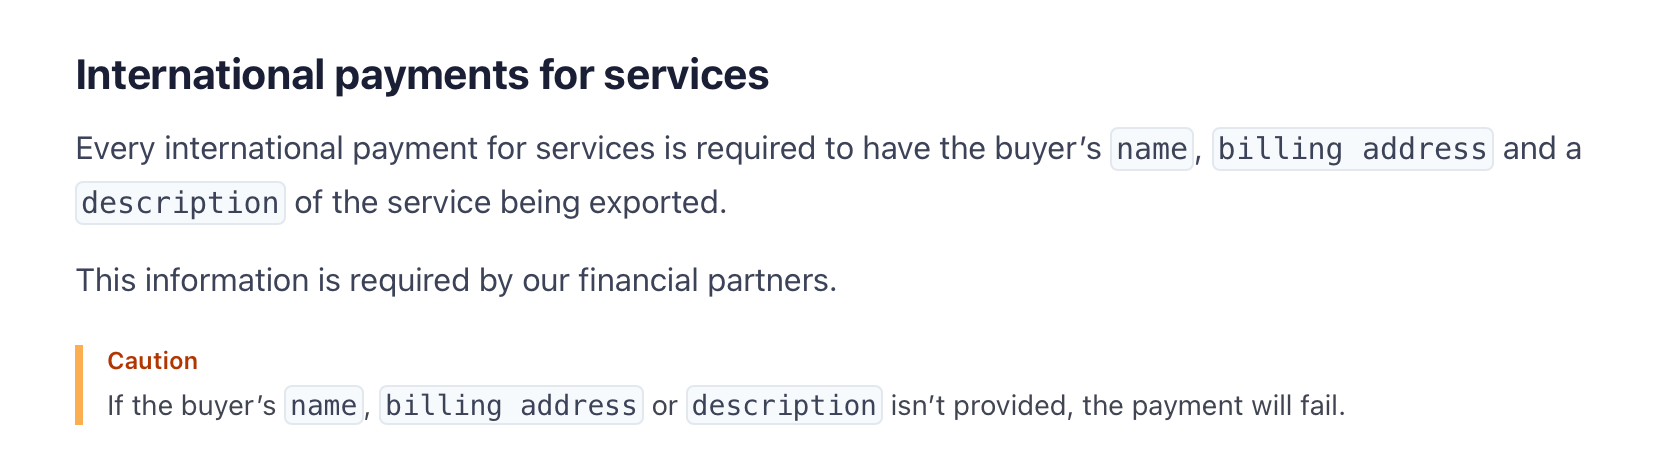 A screenshot from Stripe's explanation for the failed payments. It reads: "Every international payment for services is required to have the buyer's name, billing address, and a description of the service being exported. This is information is required by our financial partners." Below this is the word "Caution" in red, followed by this text: "If the buyer's name, billing address, or description isn't provided, the payment will fail."